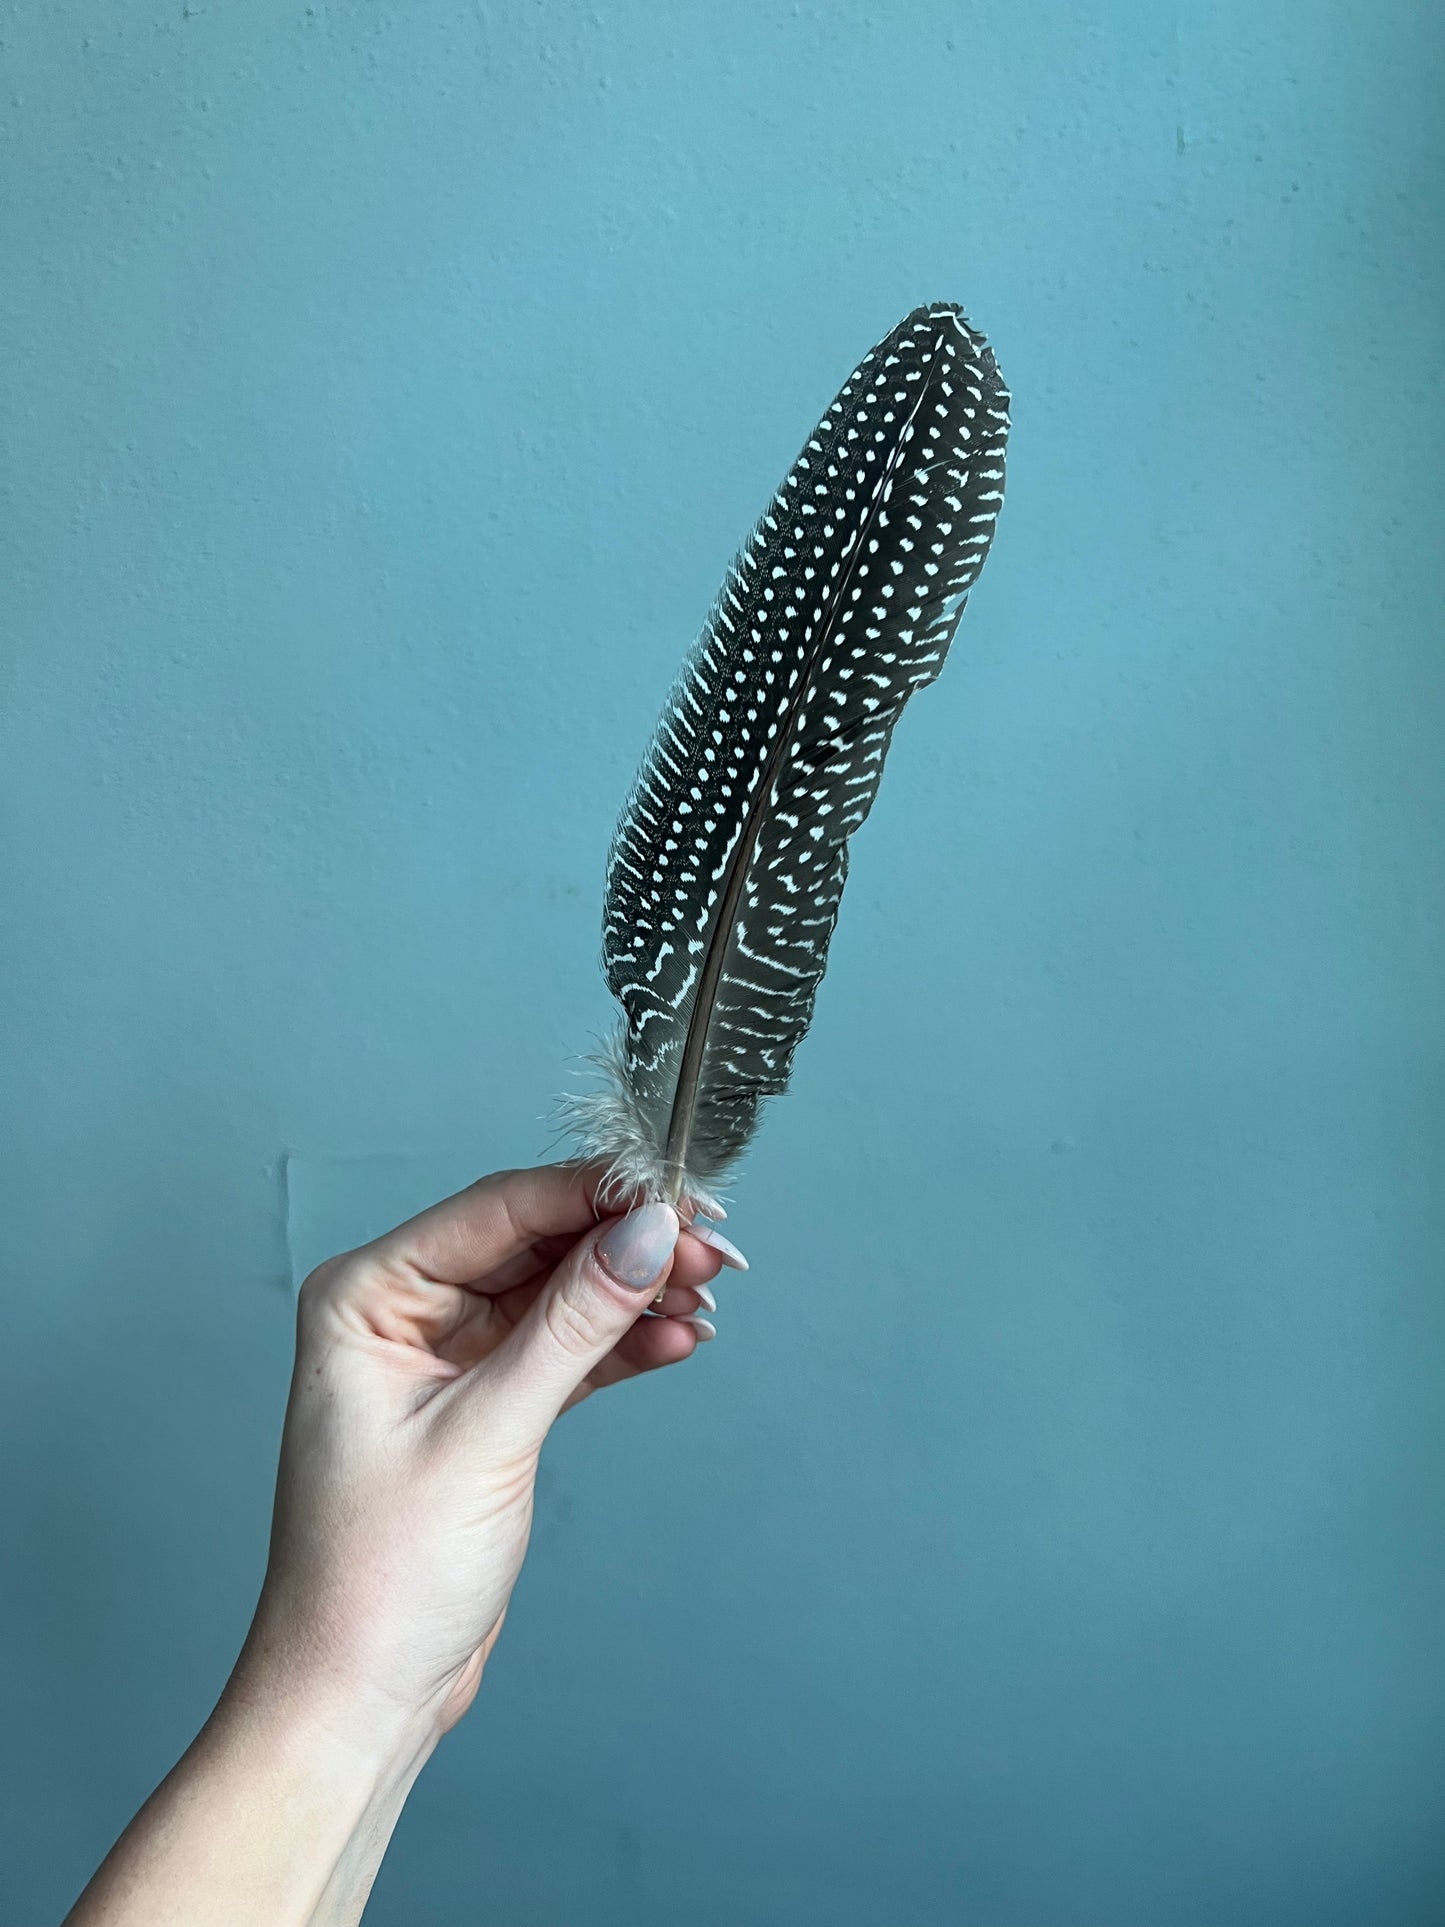 The Polka Dot Feather